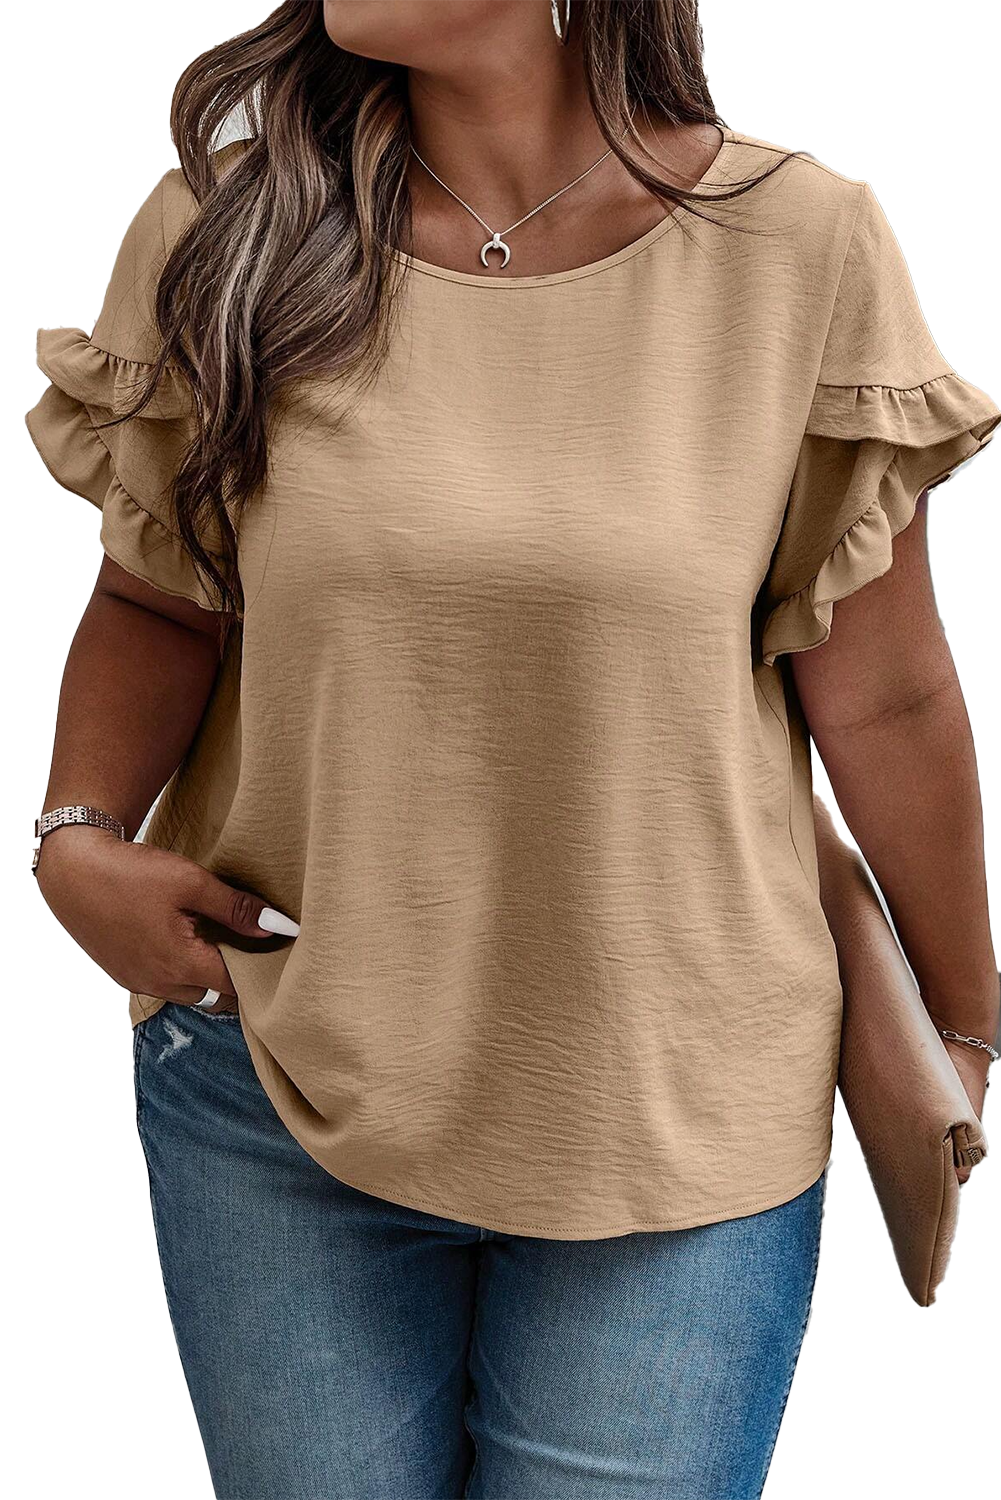 Light French Beige Ruffled Short Sleeve Plus Size Top